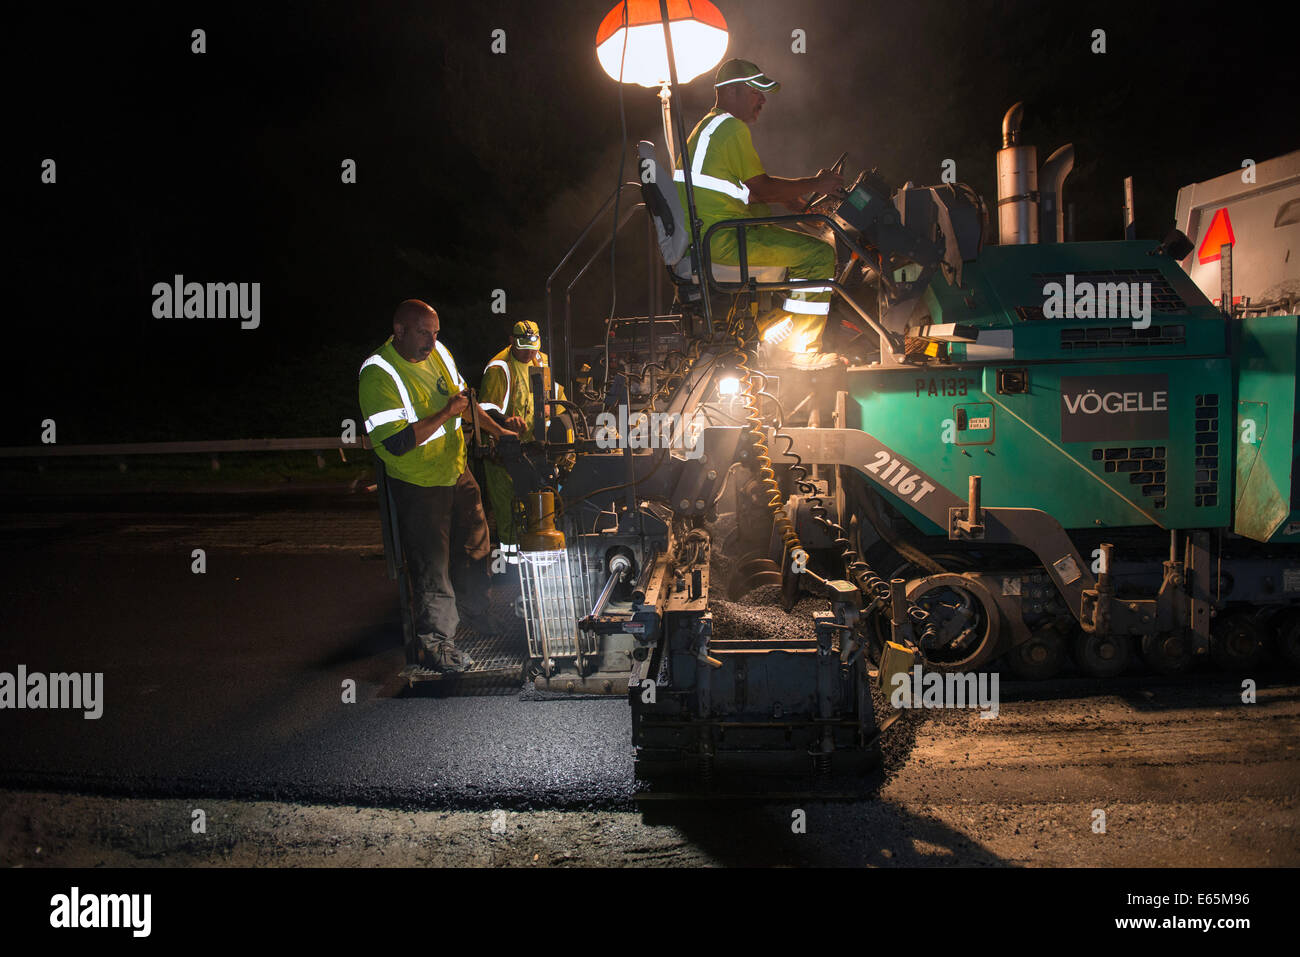 Waters Construction works on nighttime paving on the Merritt Parkway in Connecticut with tracked paving machine made by Vogele Stock Photo